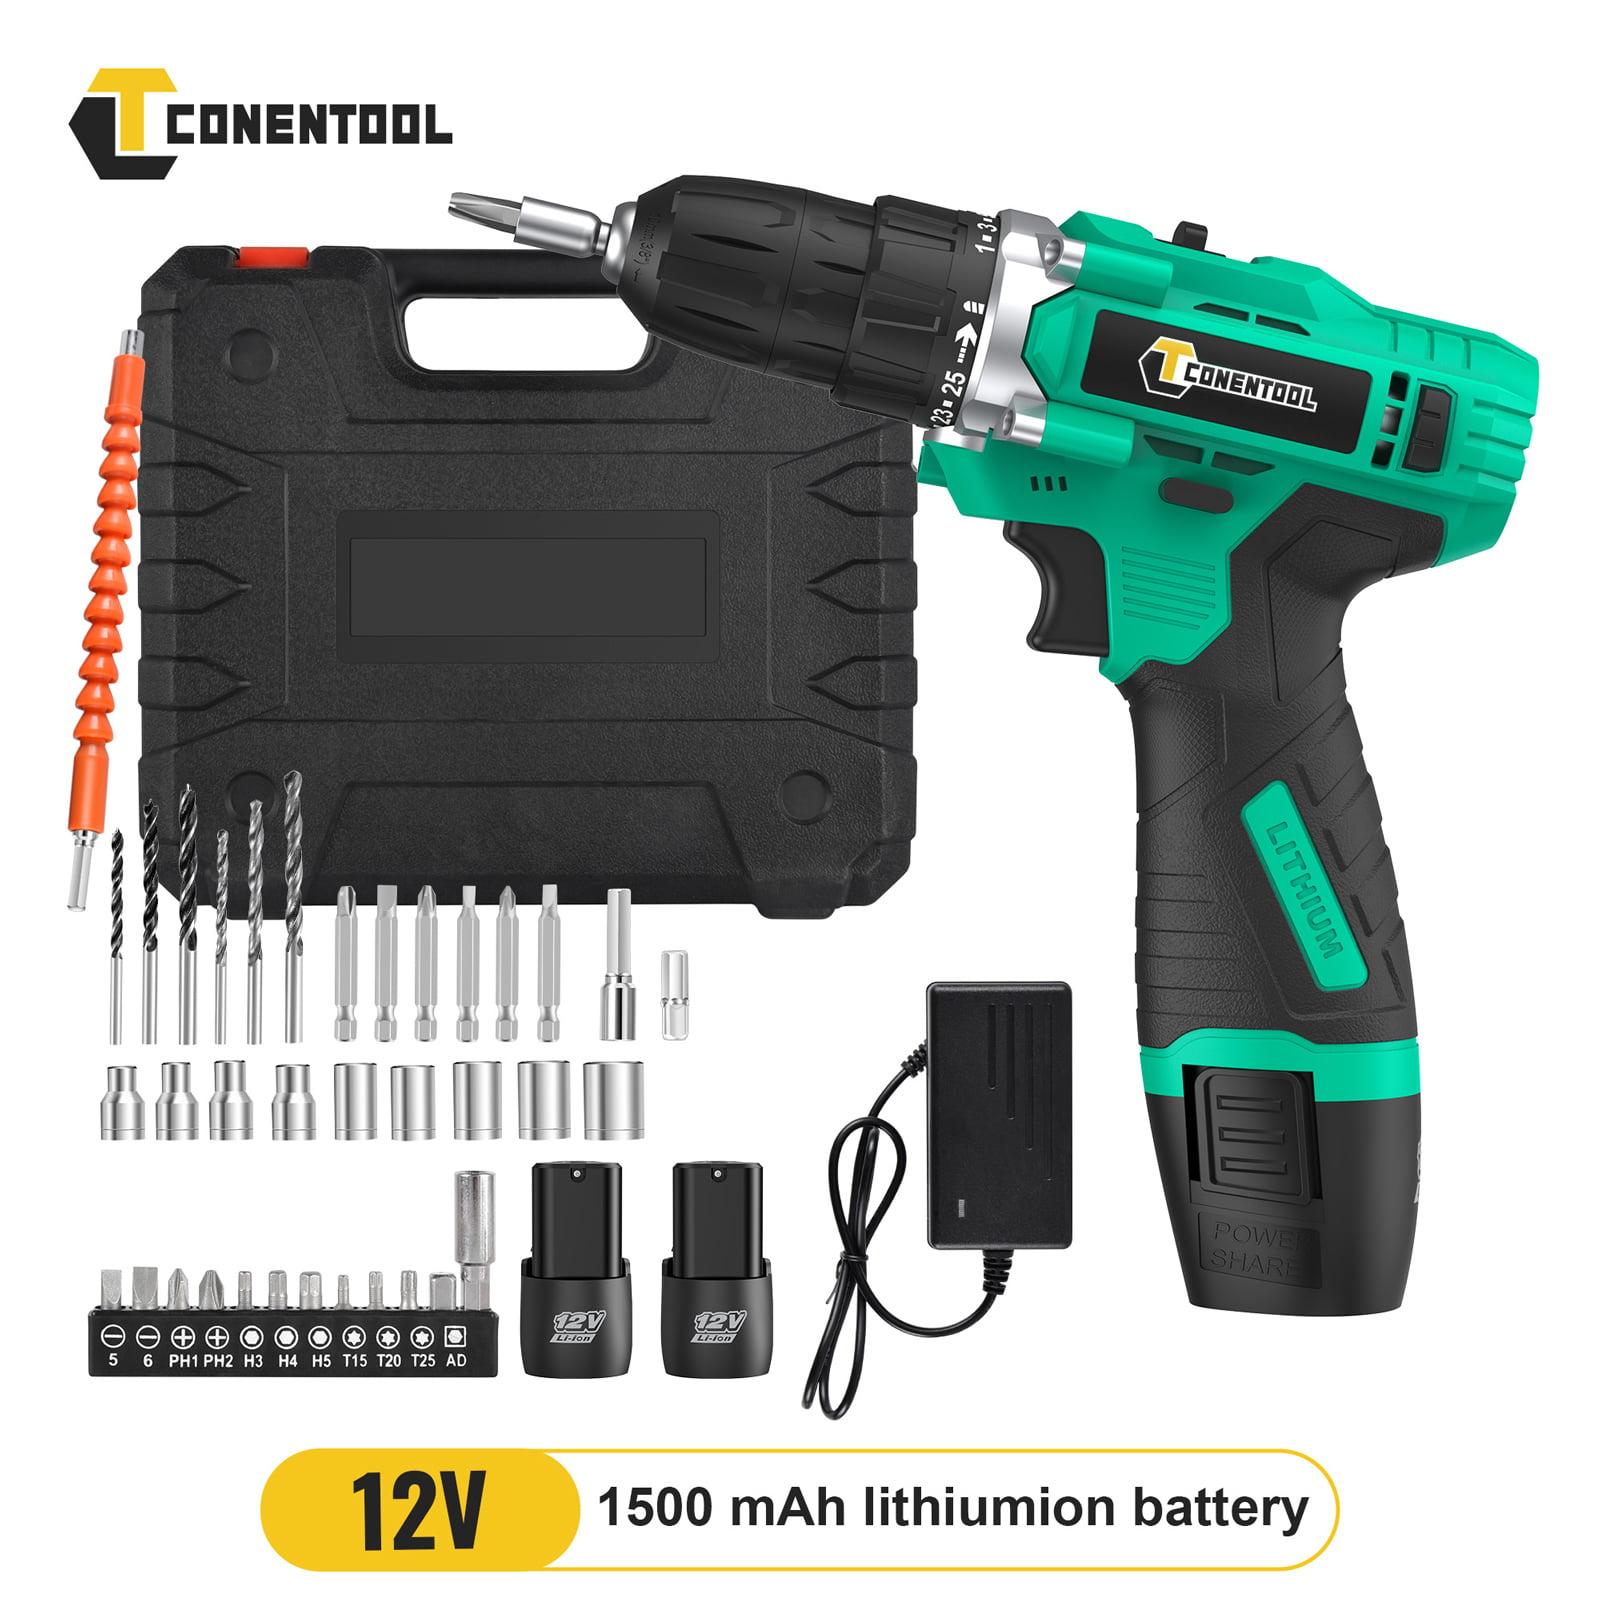 Compact 12V Cordless Drill with 2 Batteries for Versatile Power